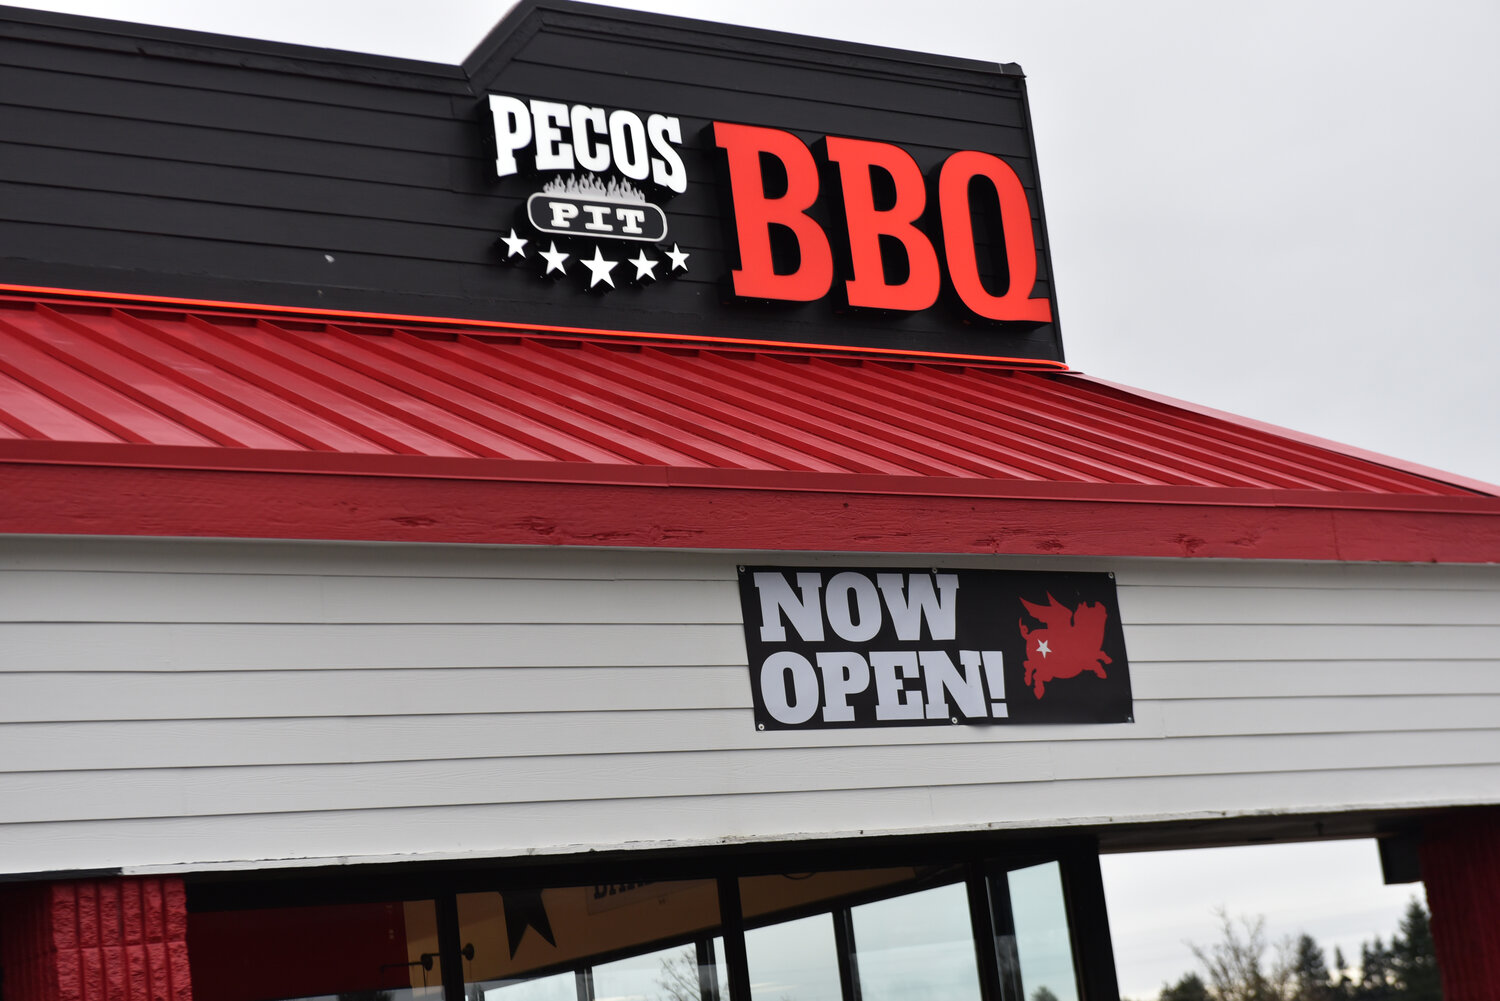 Pecos Pit Bar-B-Que is located at 1010 E Yelm Ave, Suite I. The business is open all week from 11 a.m. to 9 p.m.